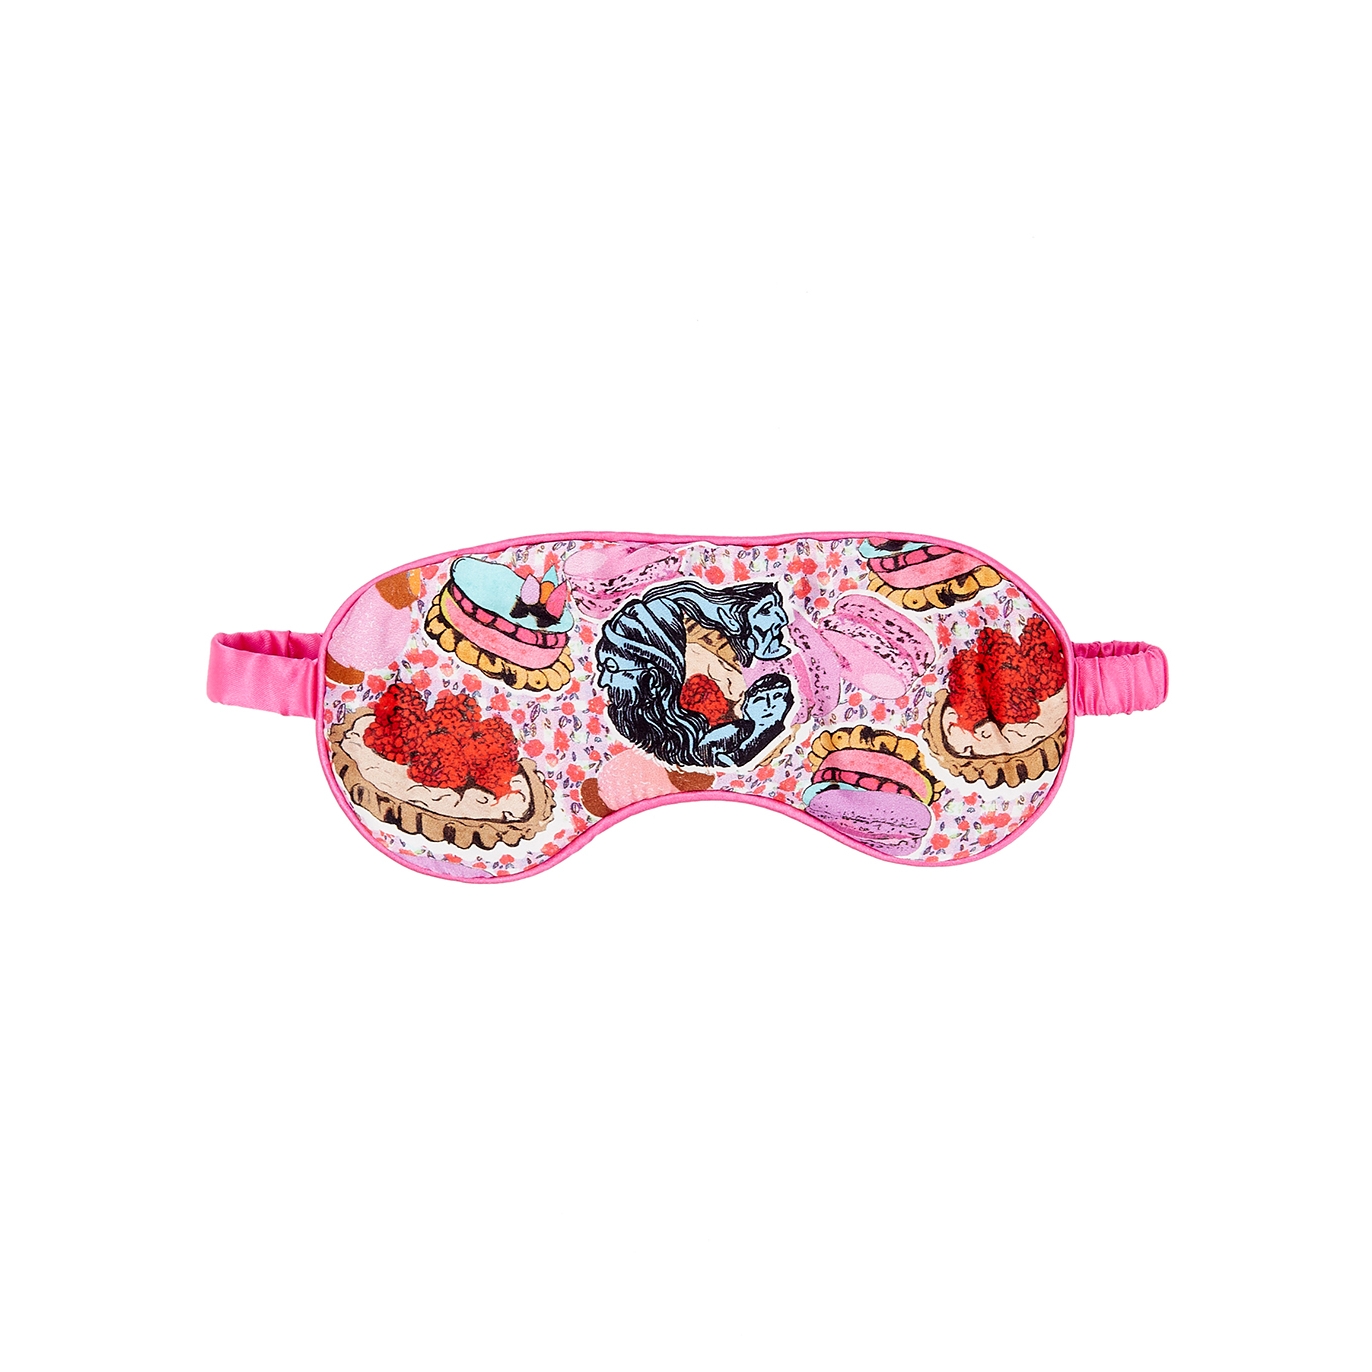 Jessica Russell Flint C Is For Cake Silk Eye Mask